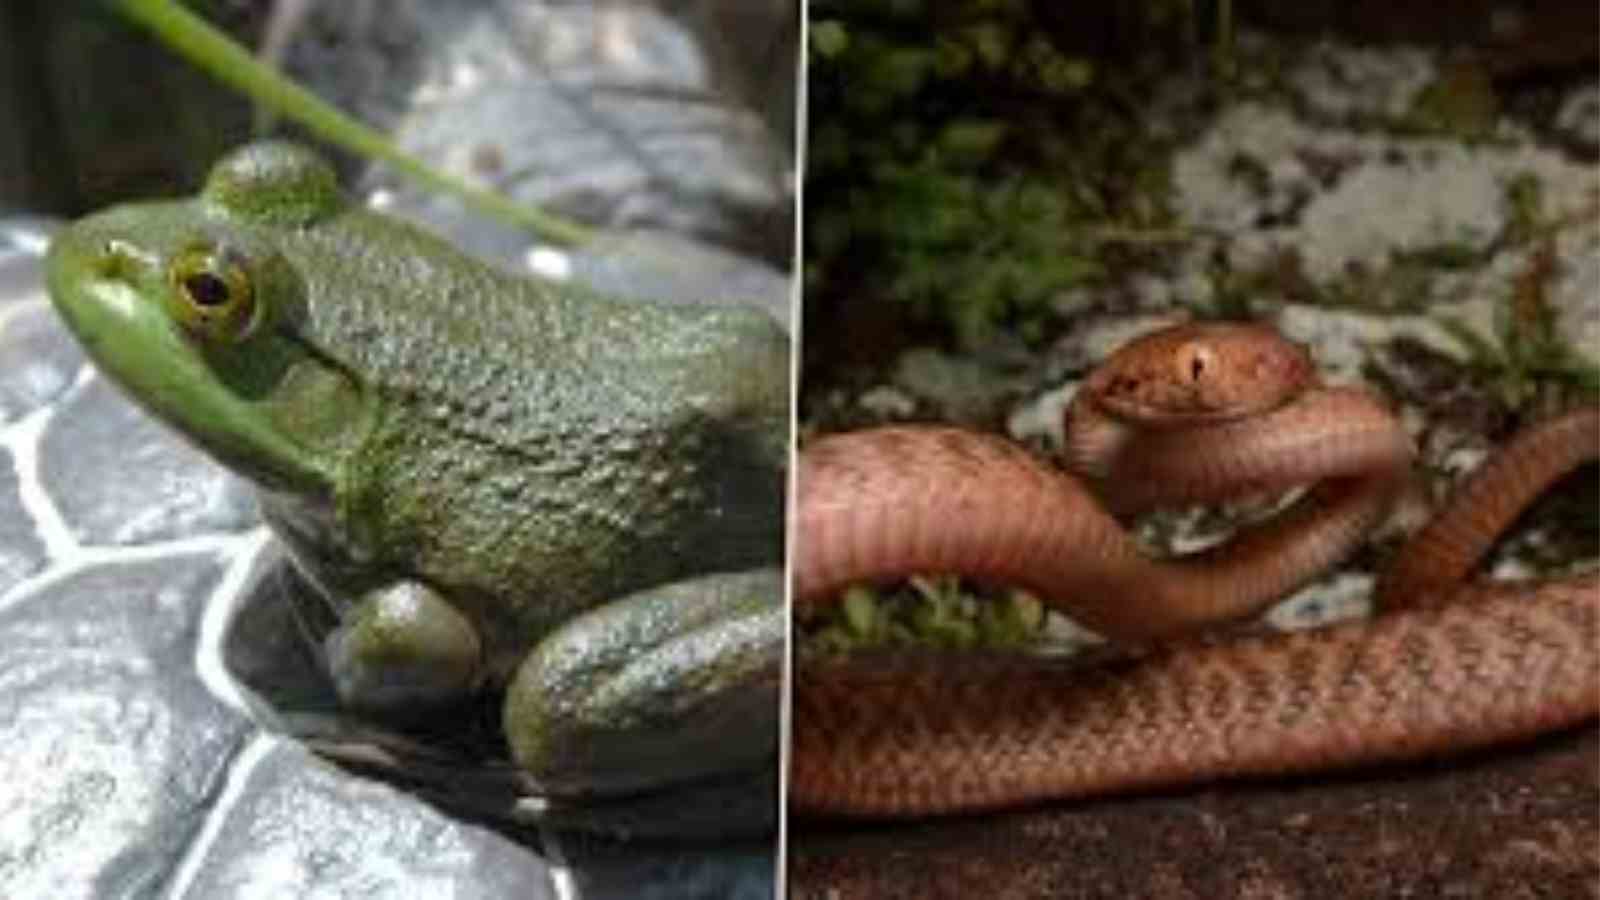 Invasive species of snake and frog